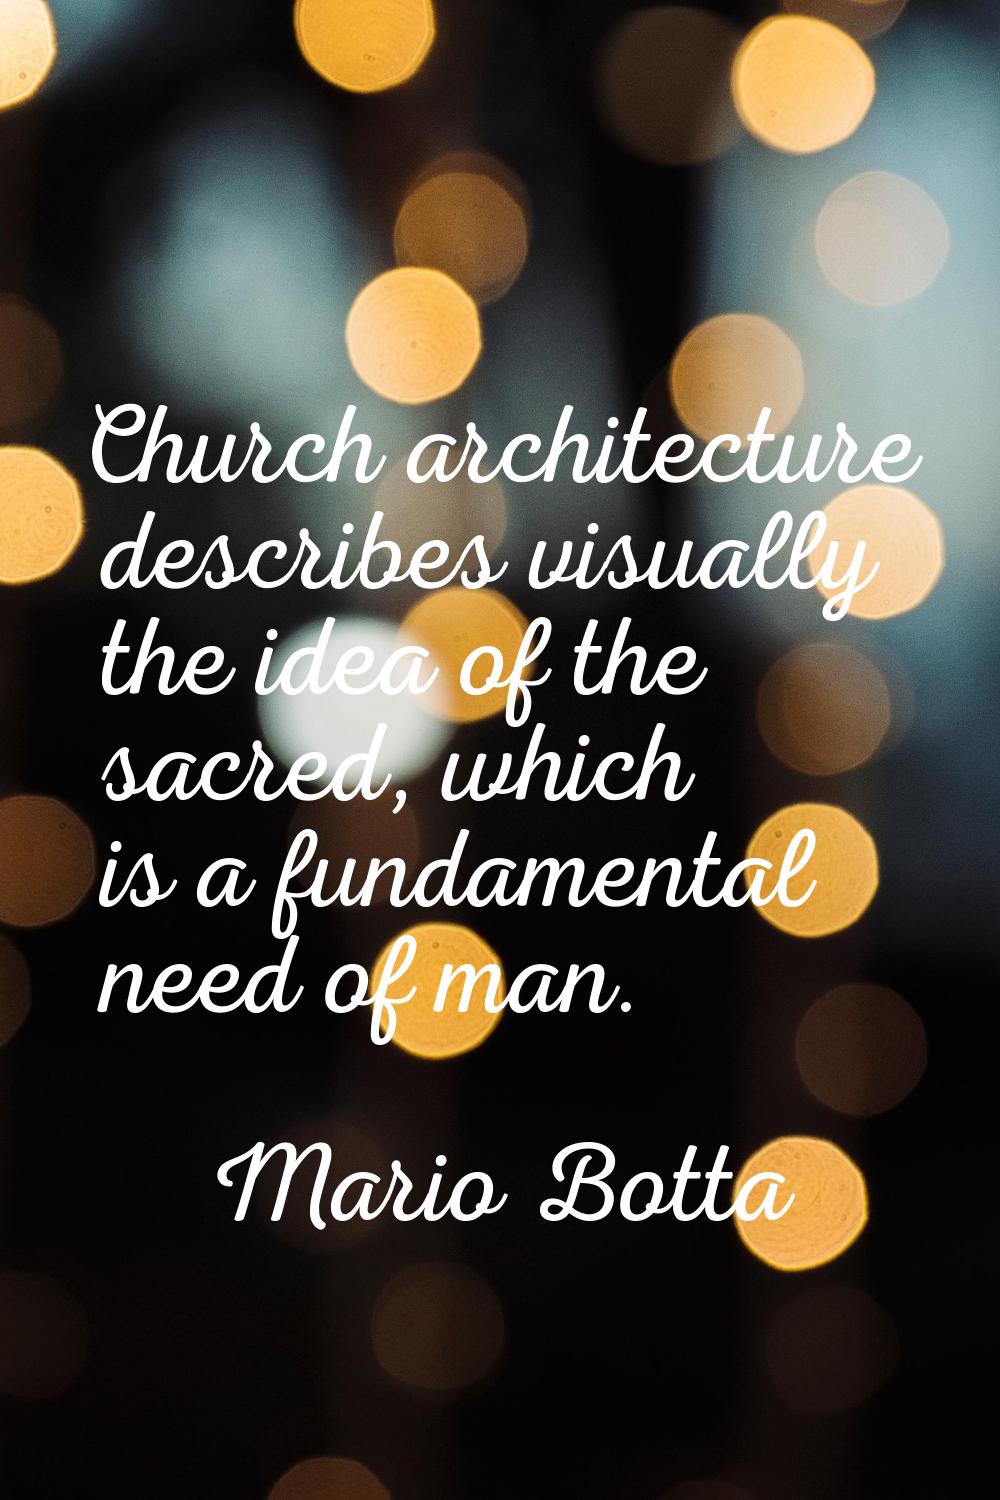 Church architecture describes visually the idea of the sacred, which is a fundamental need of man.